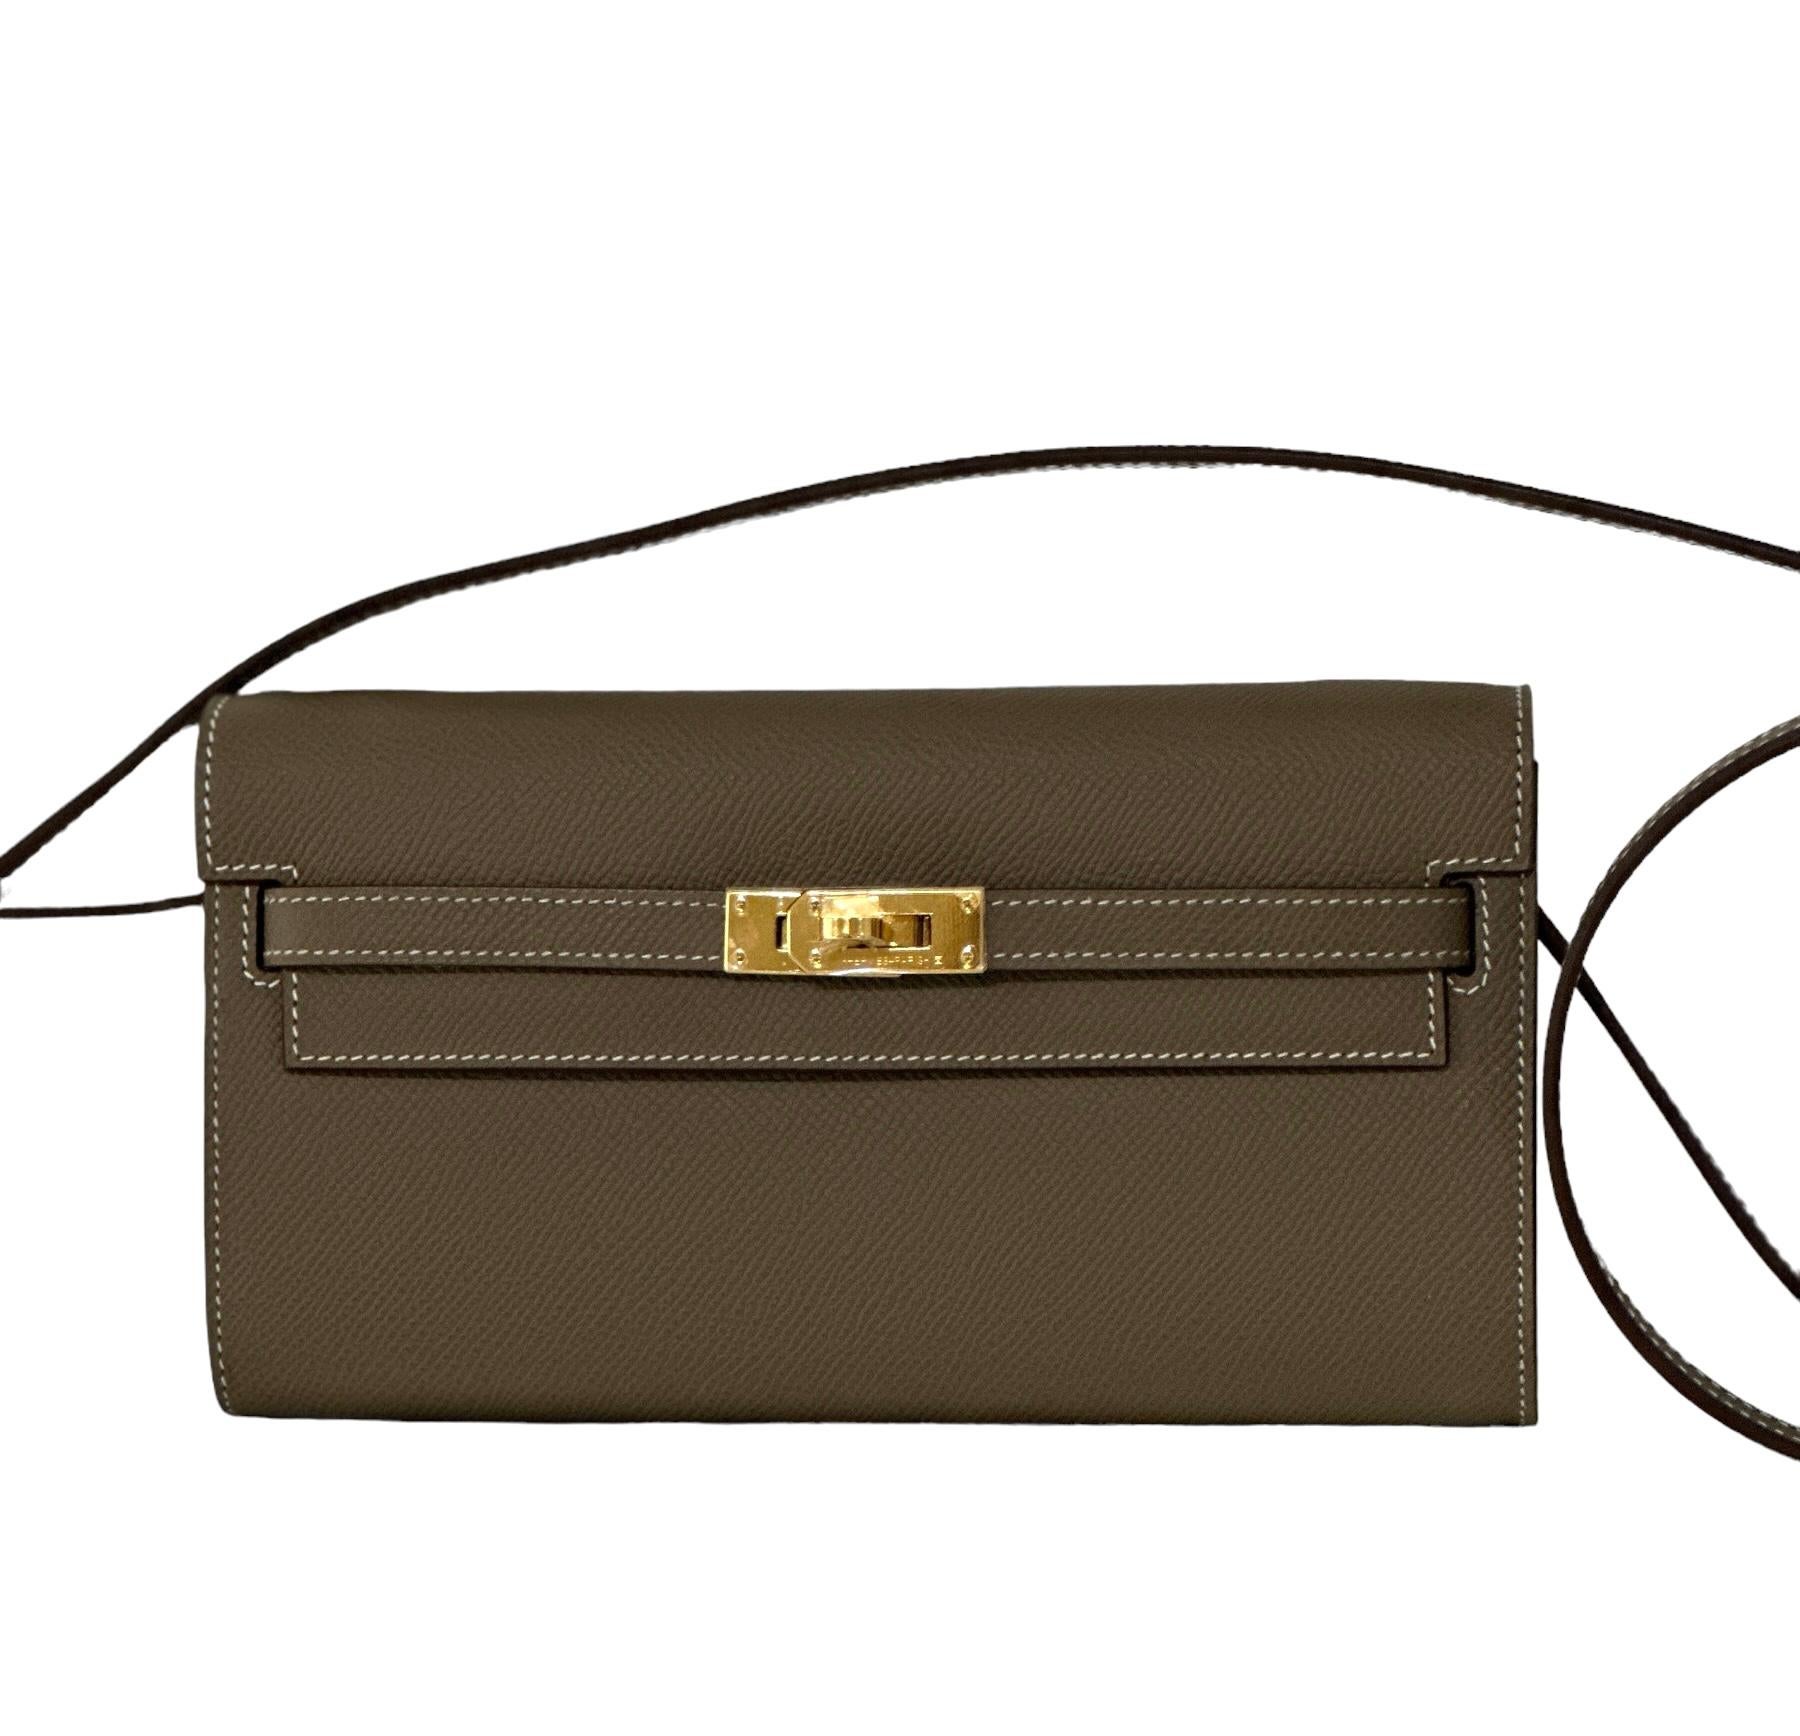 Hermes
Kelly to Go
So easy as a clutch or shoulder bag
Etoupe
Gold Hardware
Such a versatile little Bag
Constrast topstich 
Epsom Leather
Removable strap
This Kelly Wallet To Go is in Etoupe epsom leather with gold hardware and has contrast